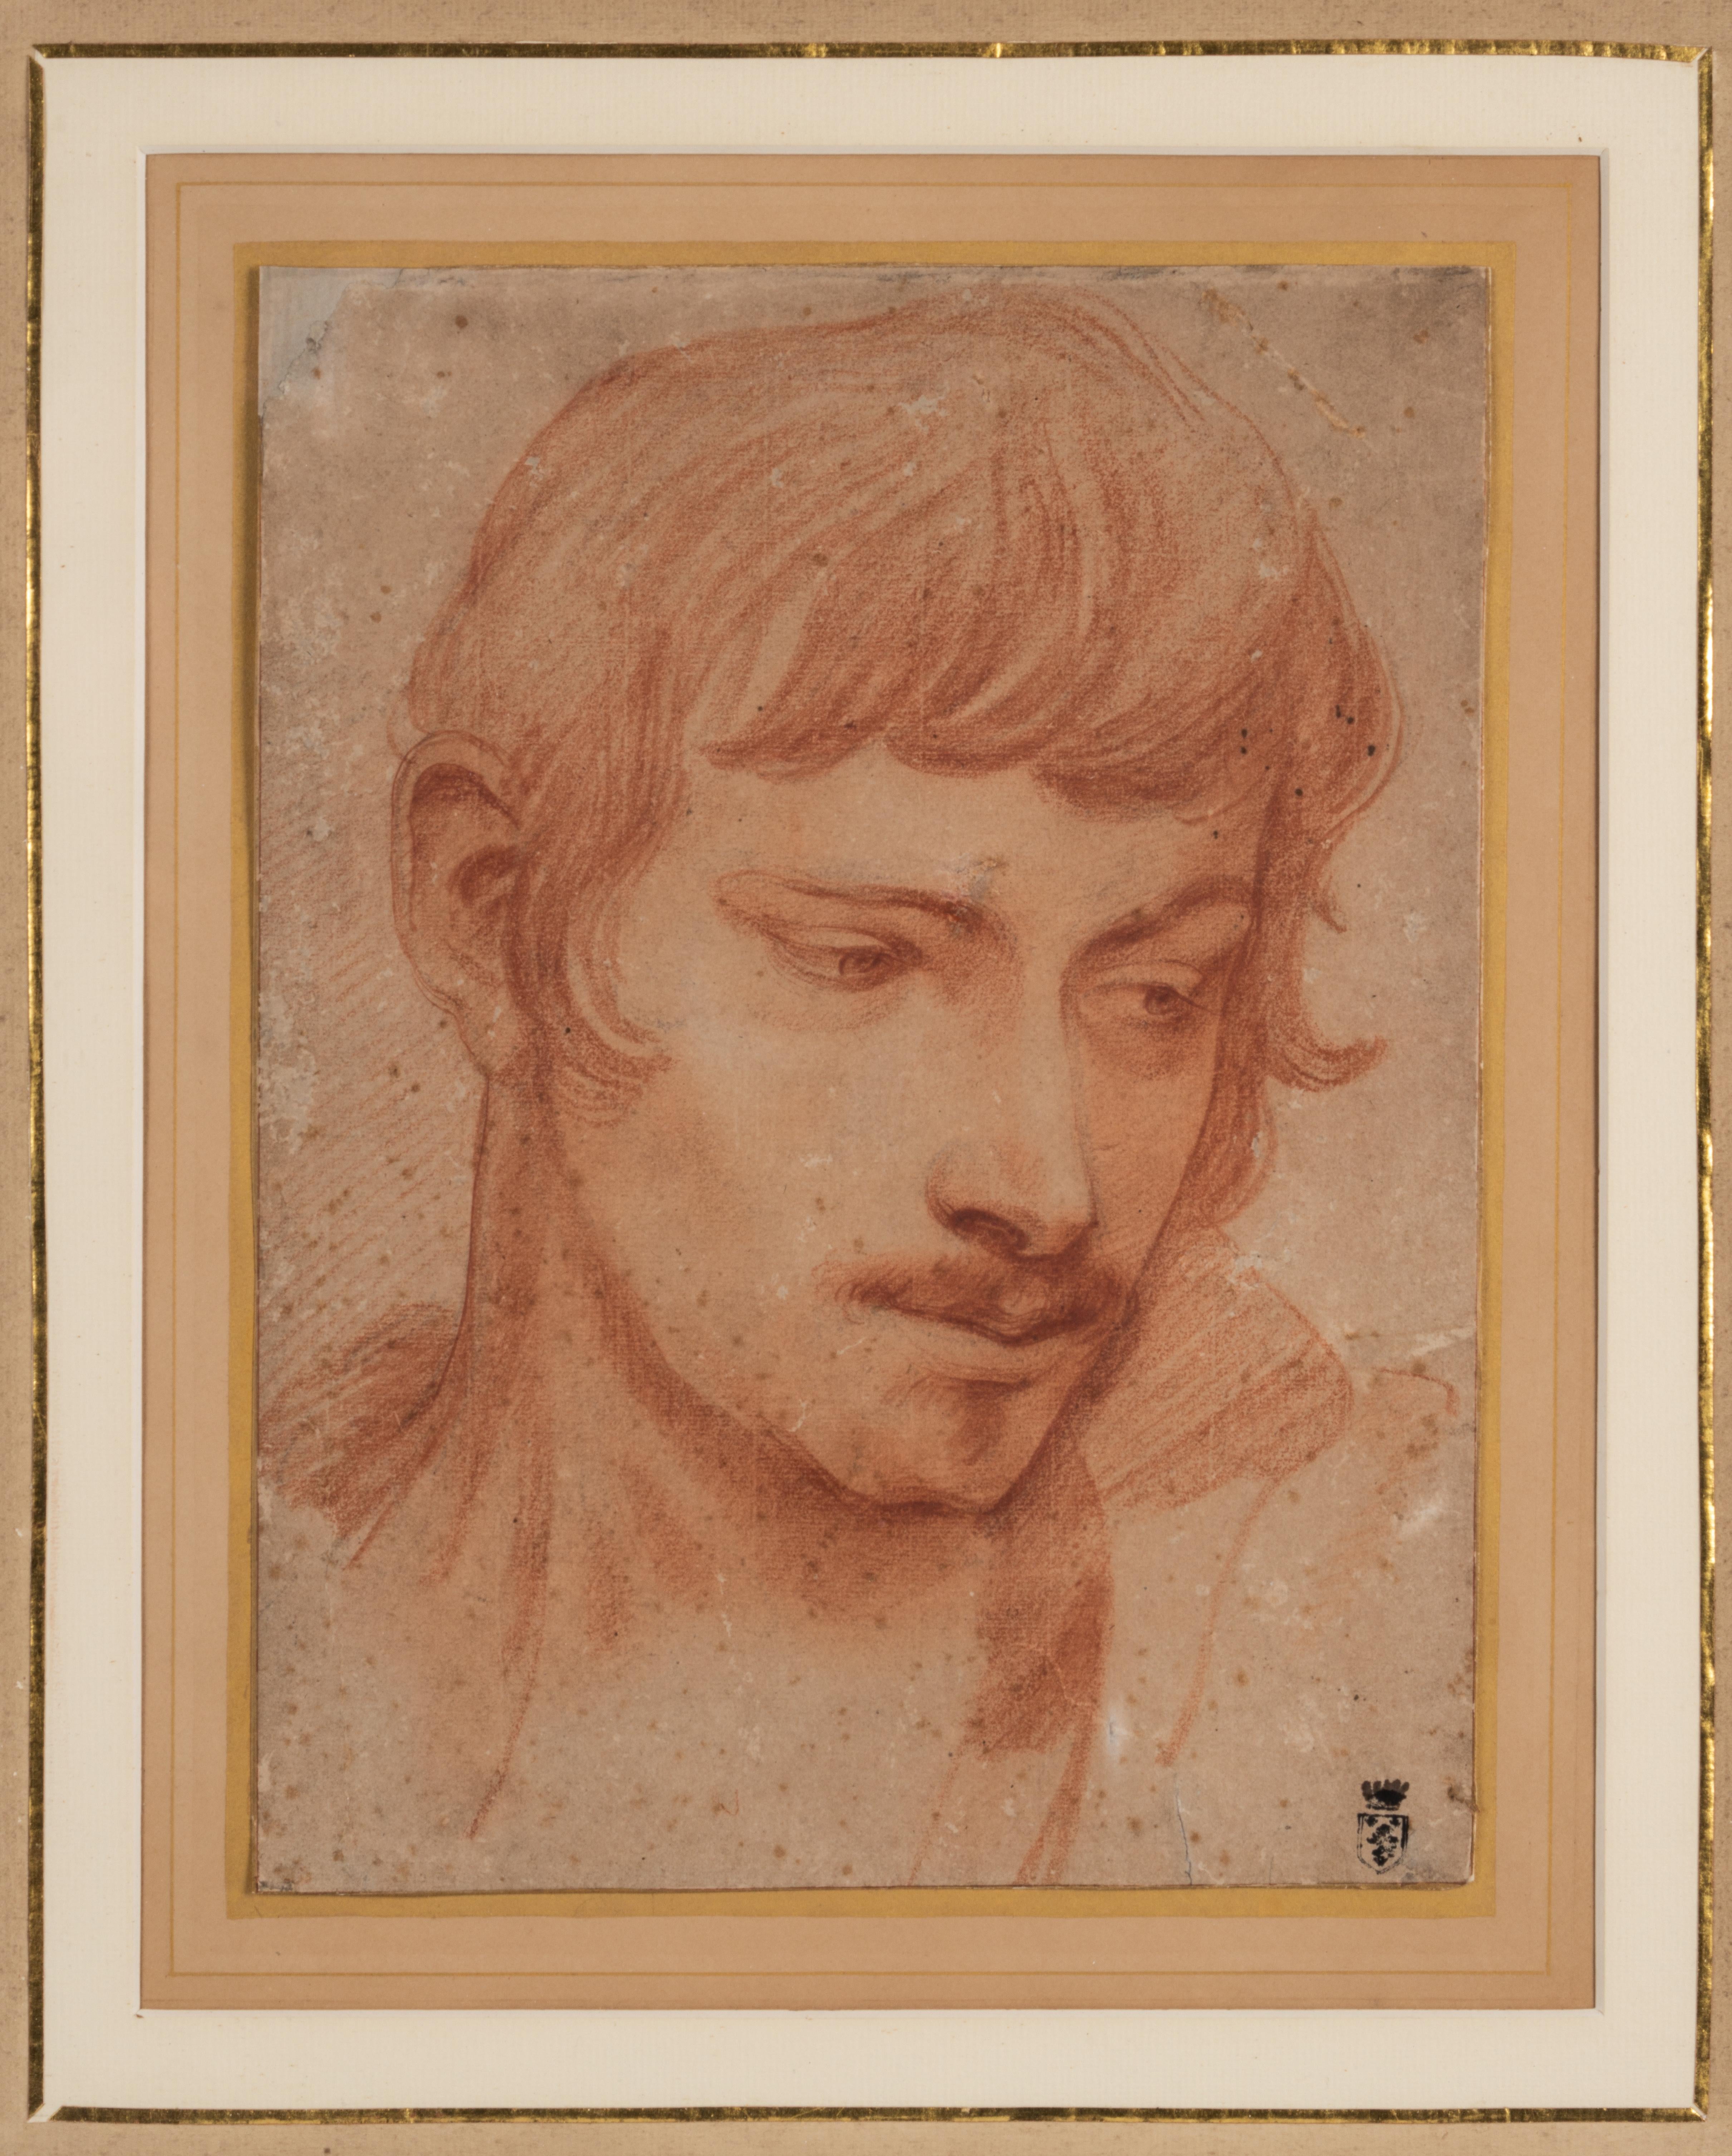 Drawing study of the head of a young man.
Red chalk on paper.
With collector's mark at bottom, surmounted by a crown.
In an 18th Century Spanish frame.
From the Wanamaker family, the family which built the first department store in Philadelphia